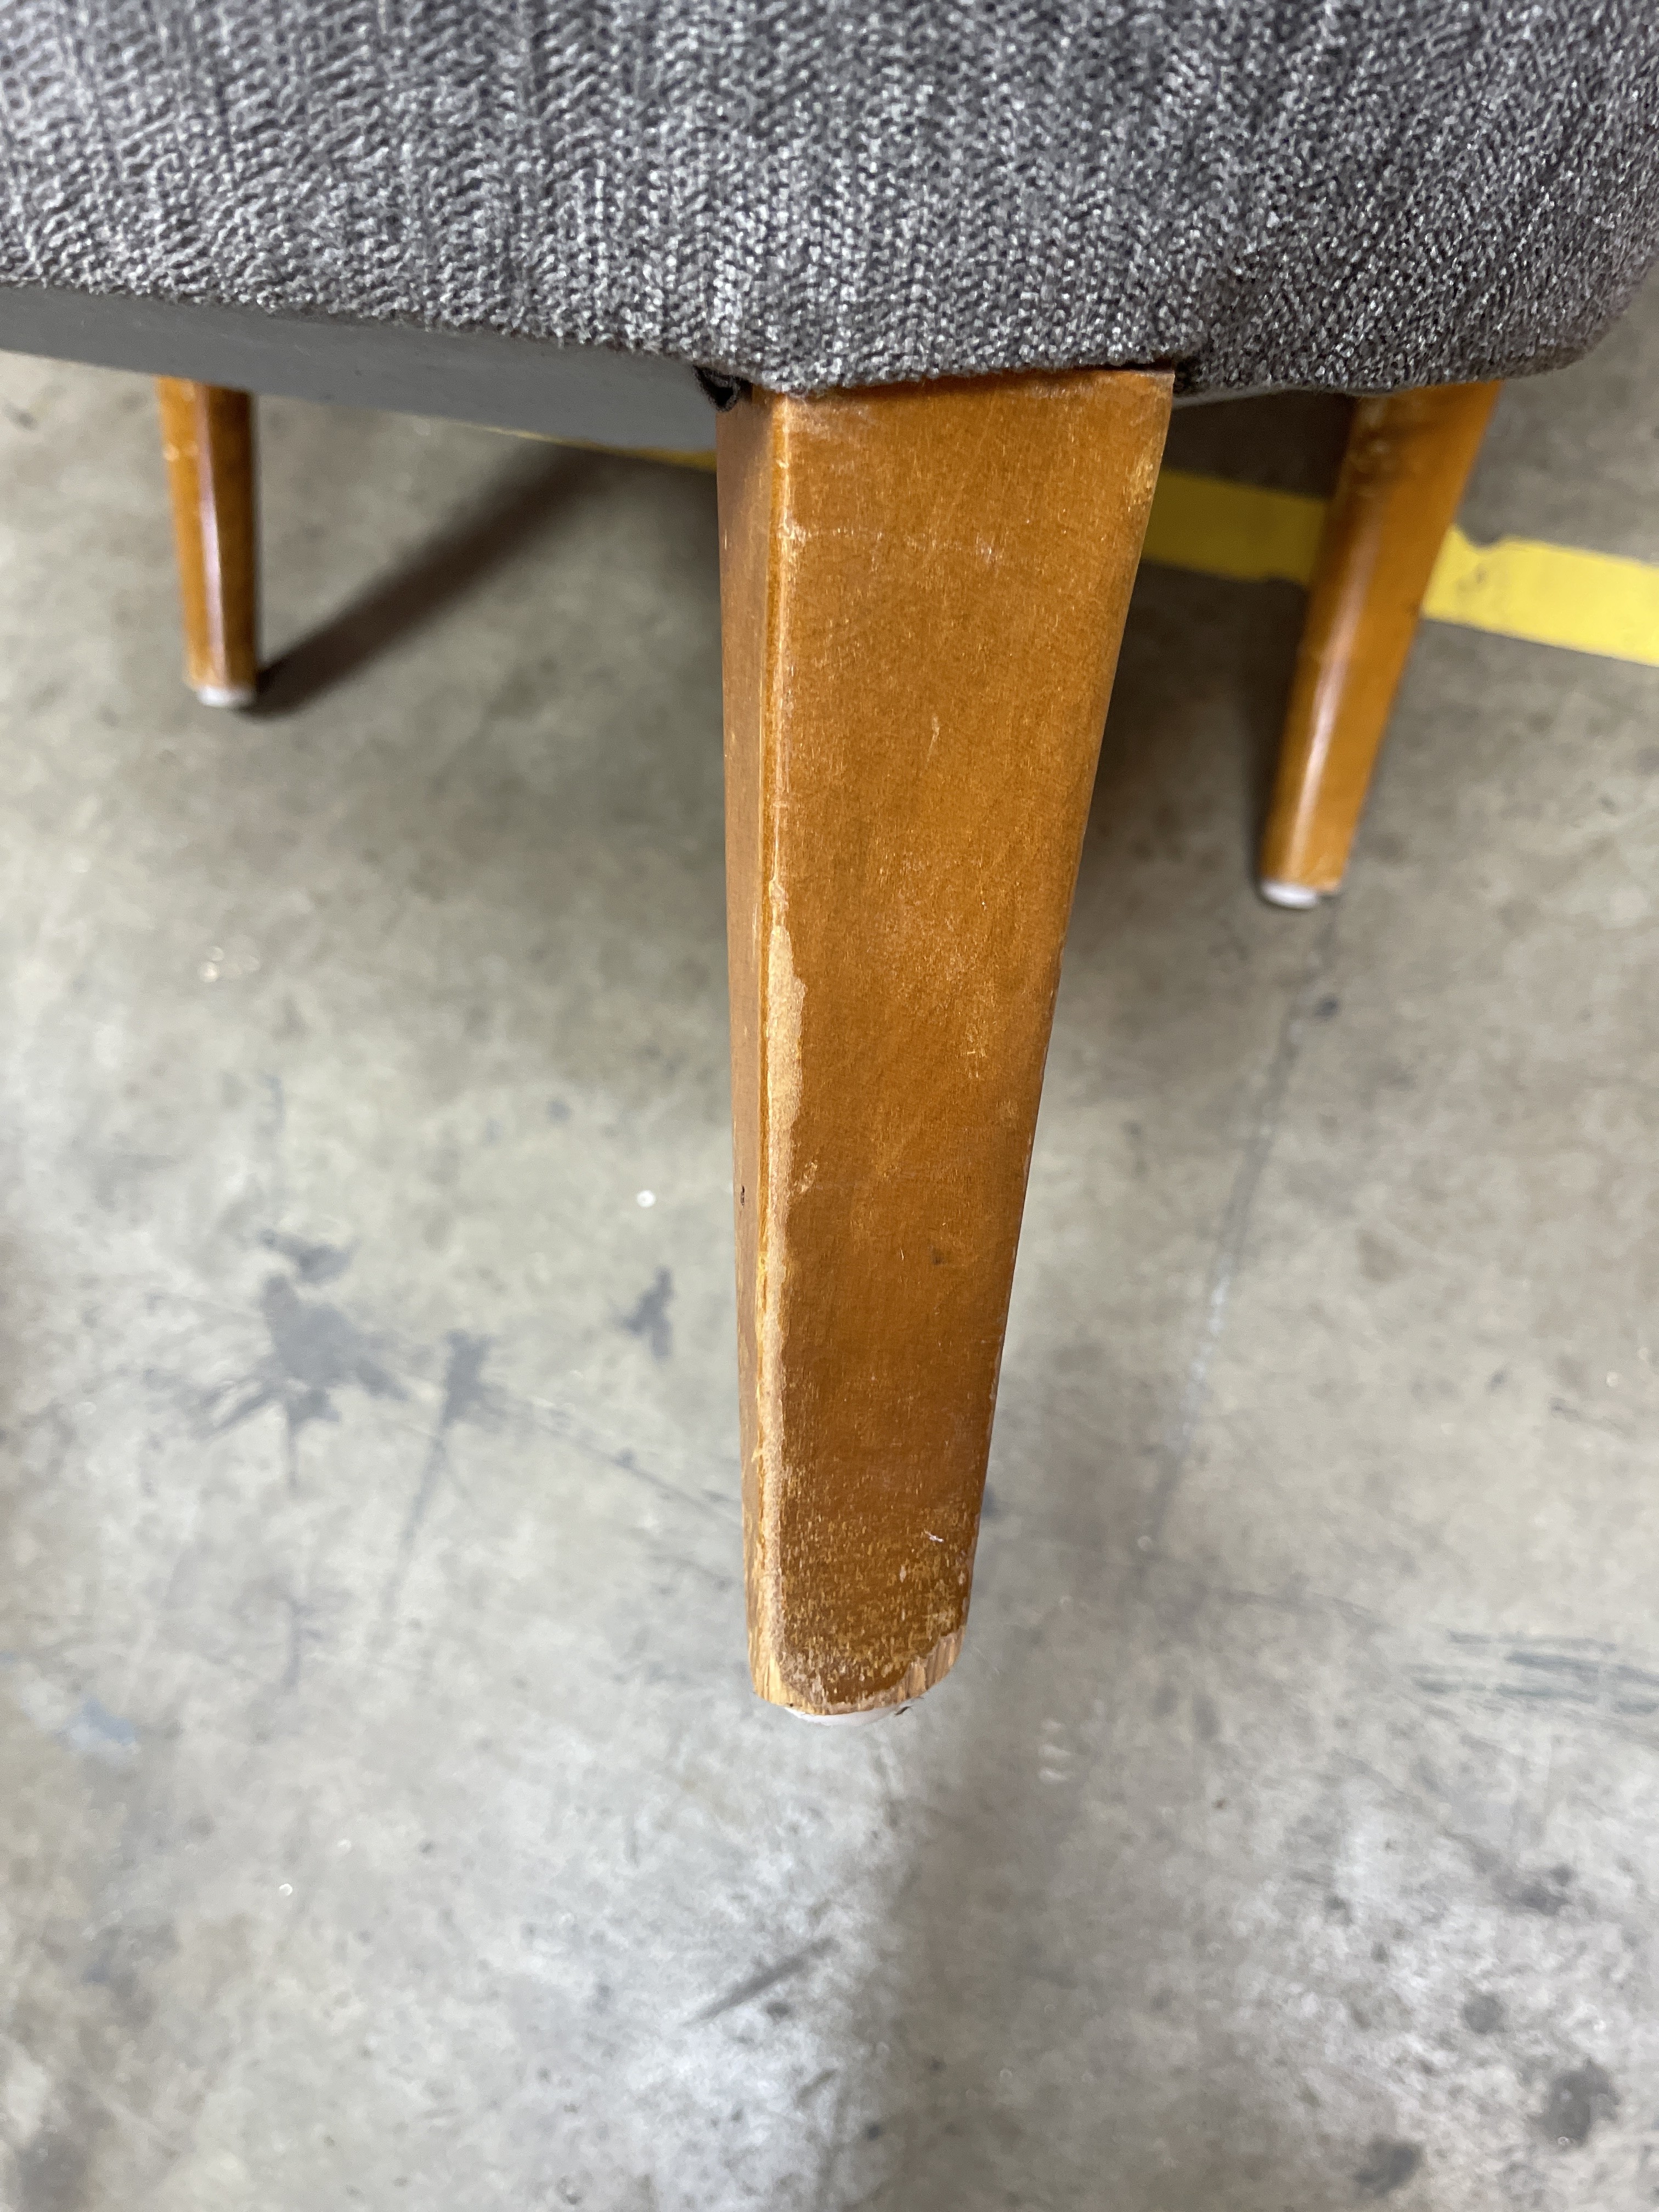 a close up of a wooden chair with a gray seat